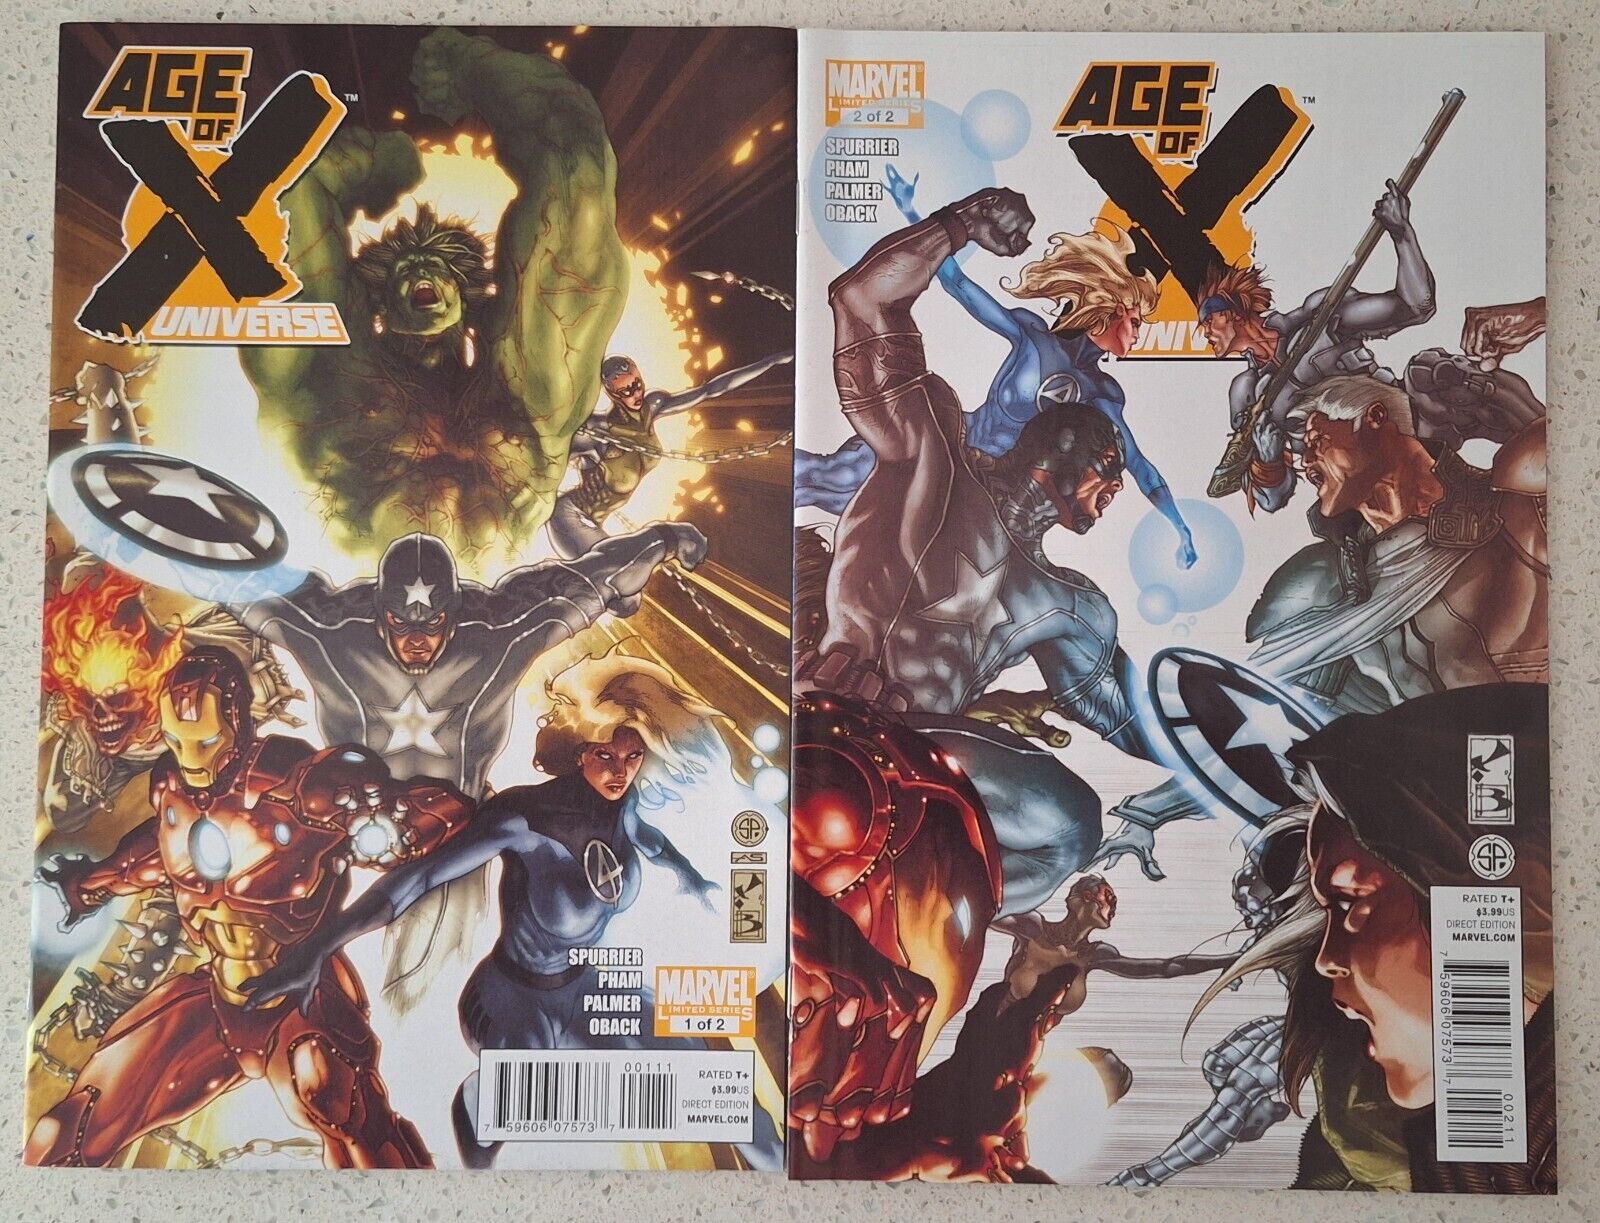 Marvel-Age of X Universe #1-2 Complete Series-2011-X-Men